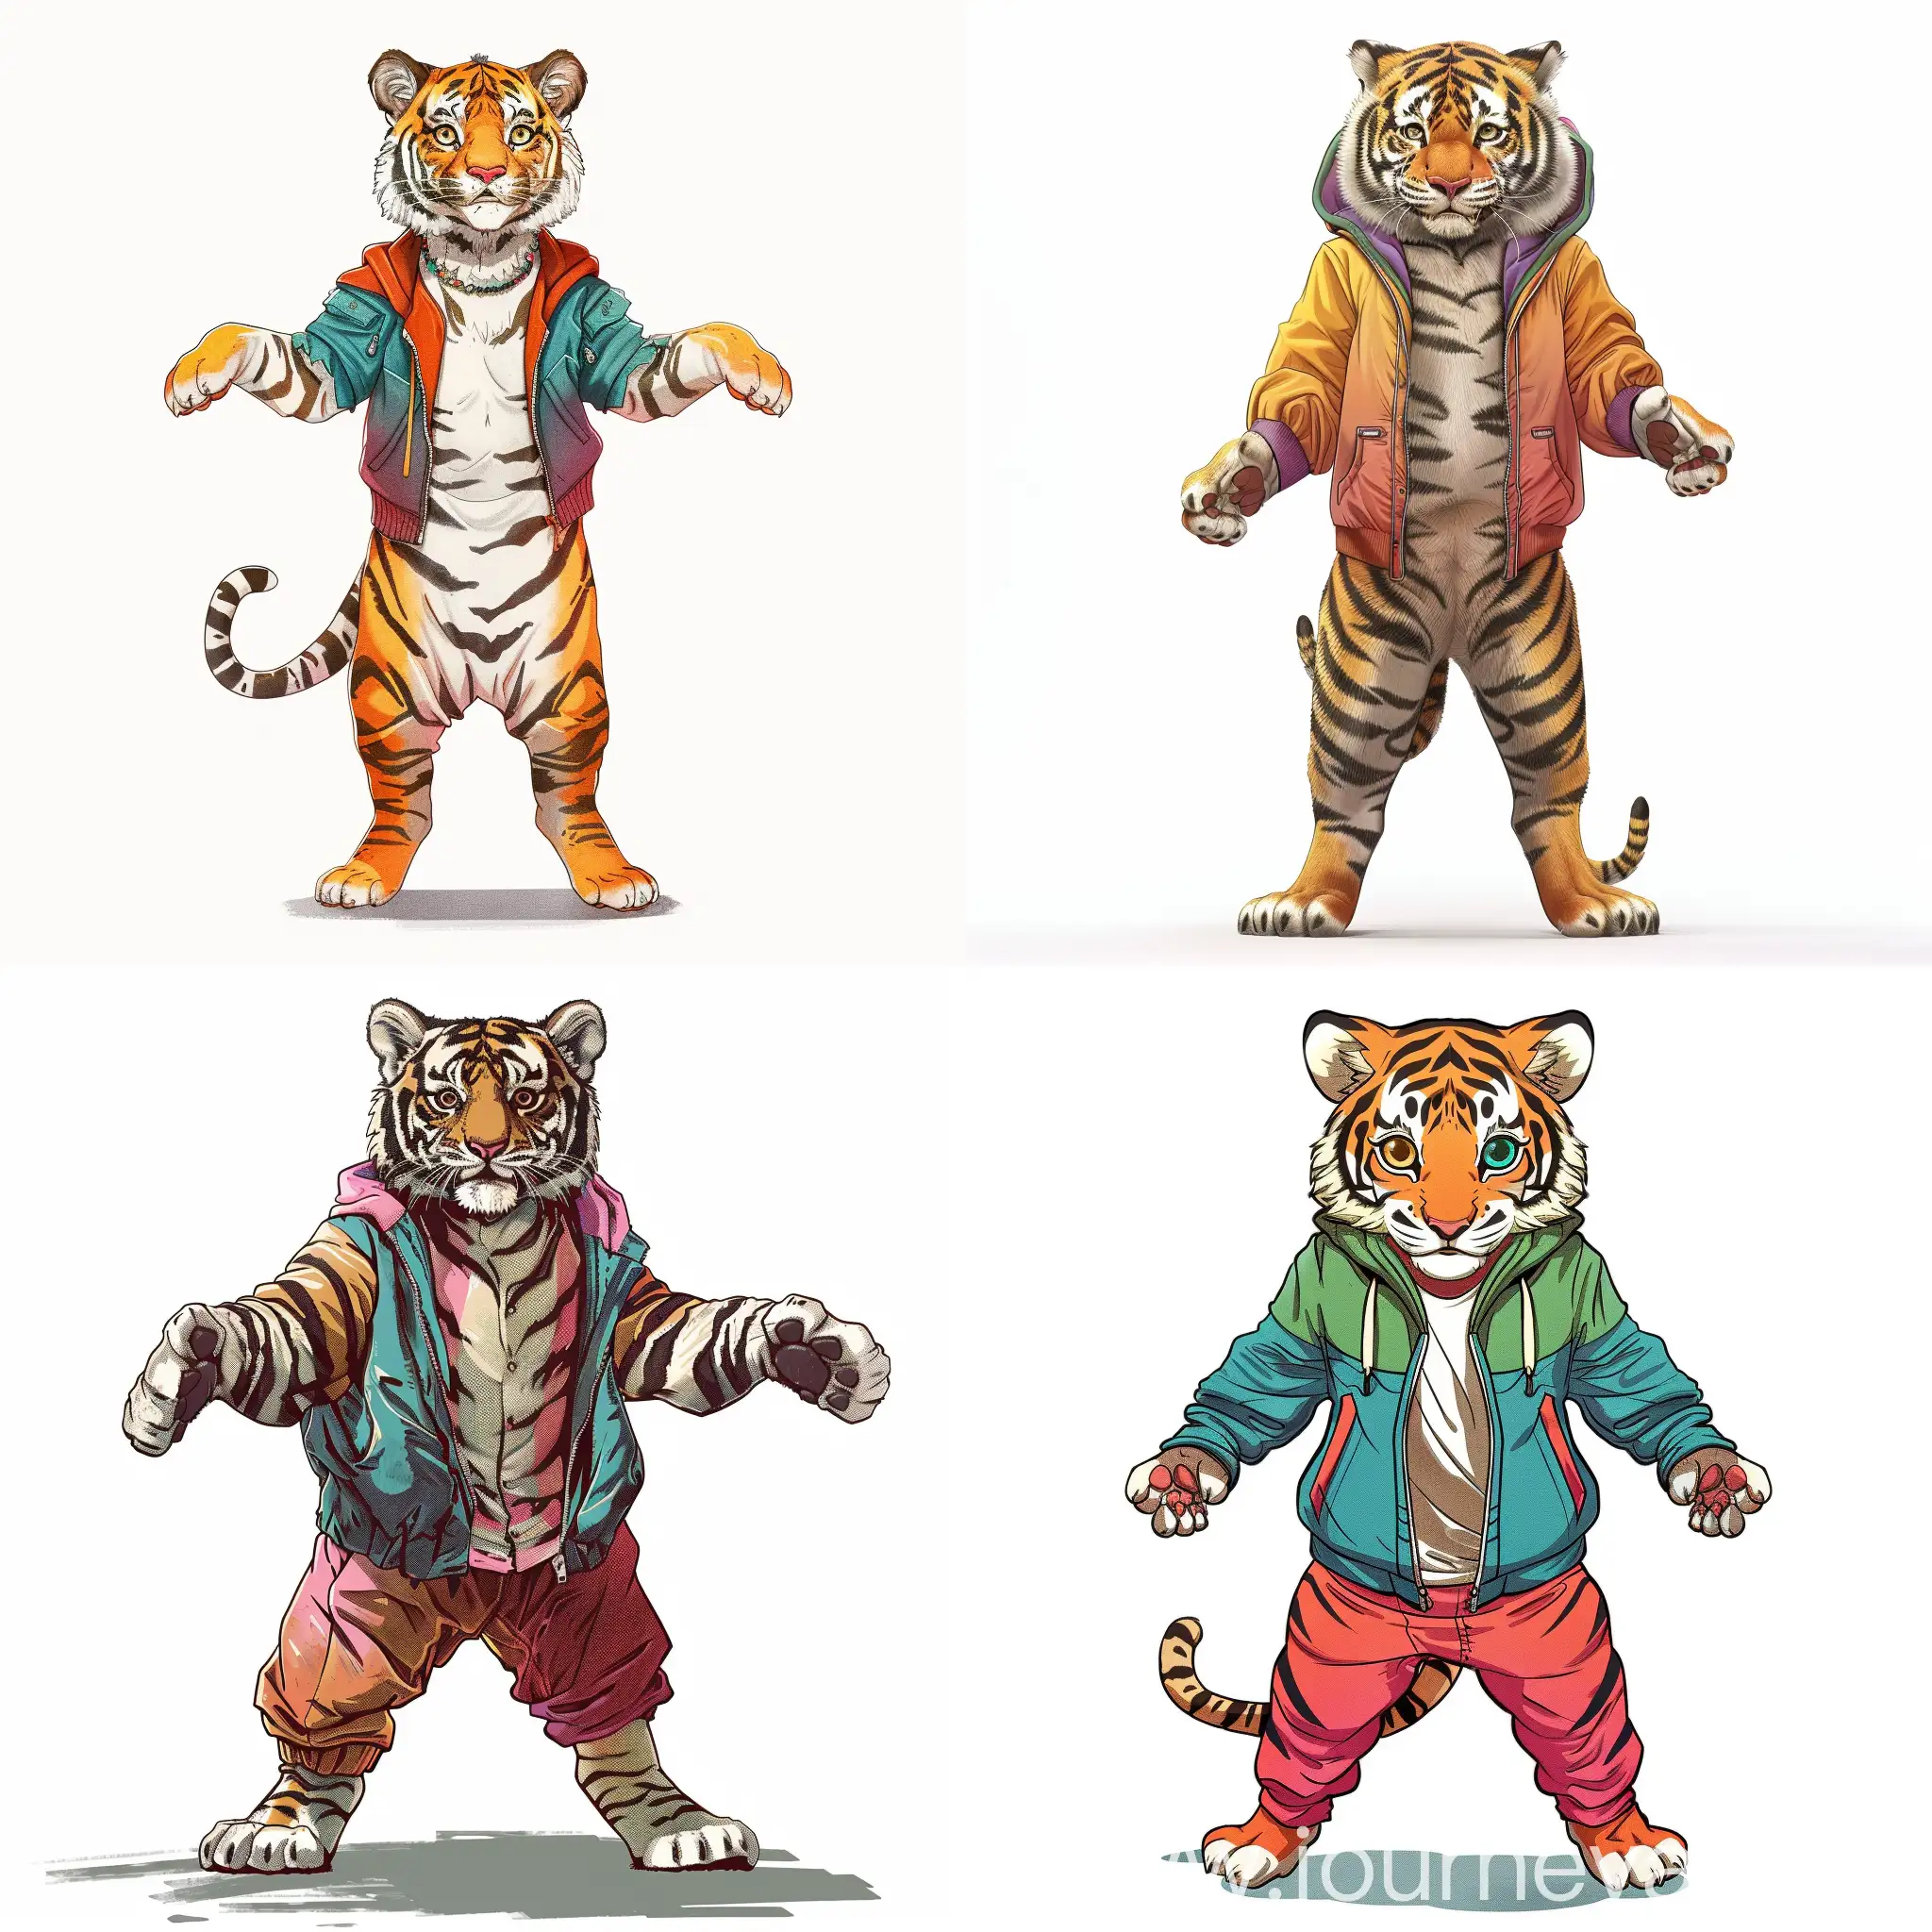 childish style, cartoon style, small detail, full-length anthropomorphic tiger cub standing on his hind legs in colored clothes, front paws to the sides, front view, white background